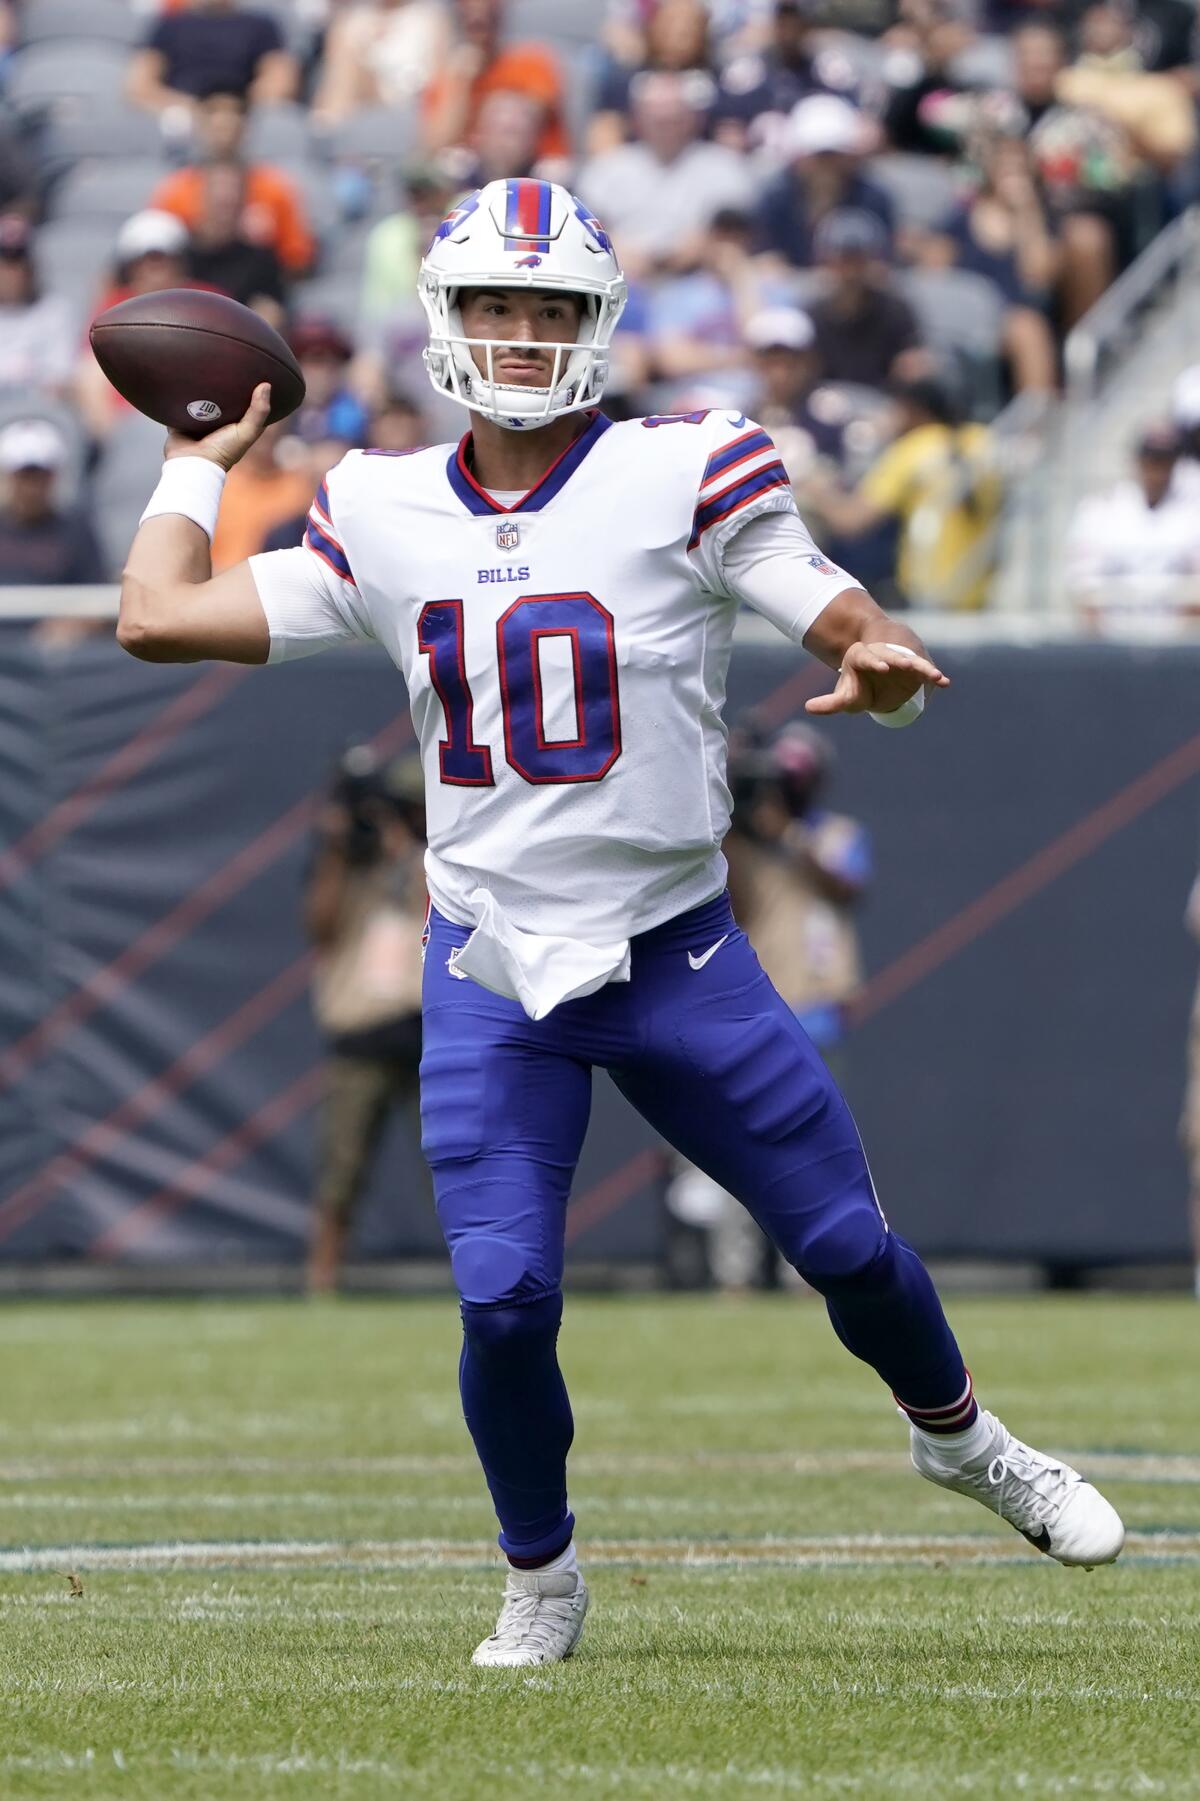 Trubisky shines as Bills roll past Bears with 41-15 win - The San